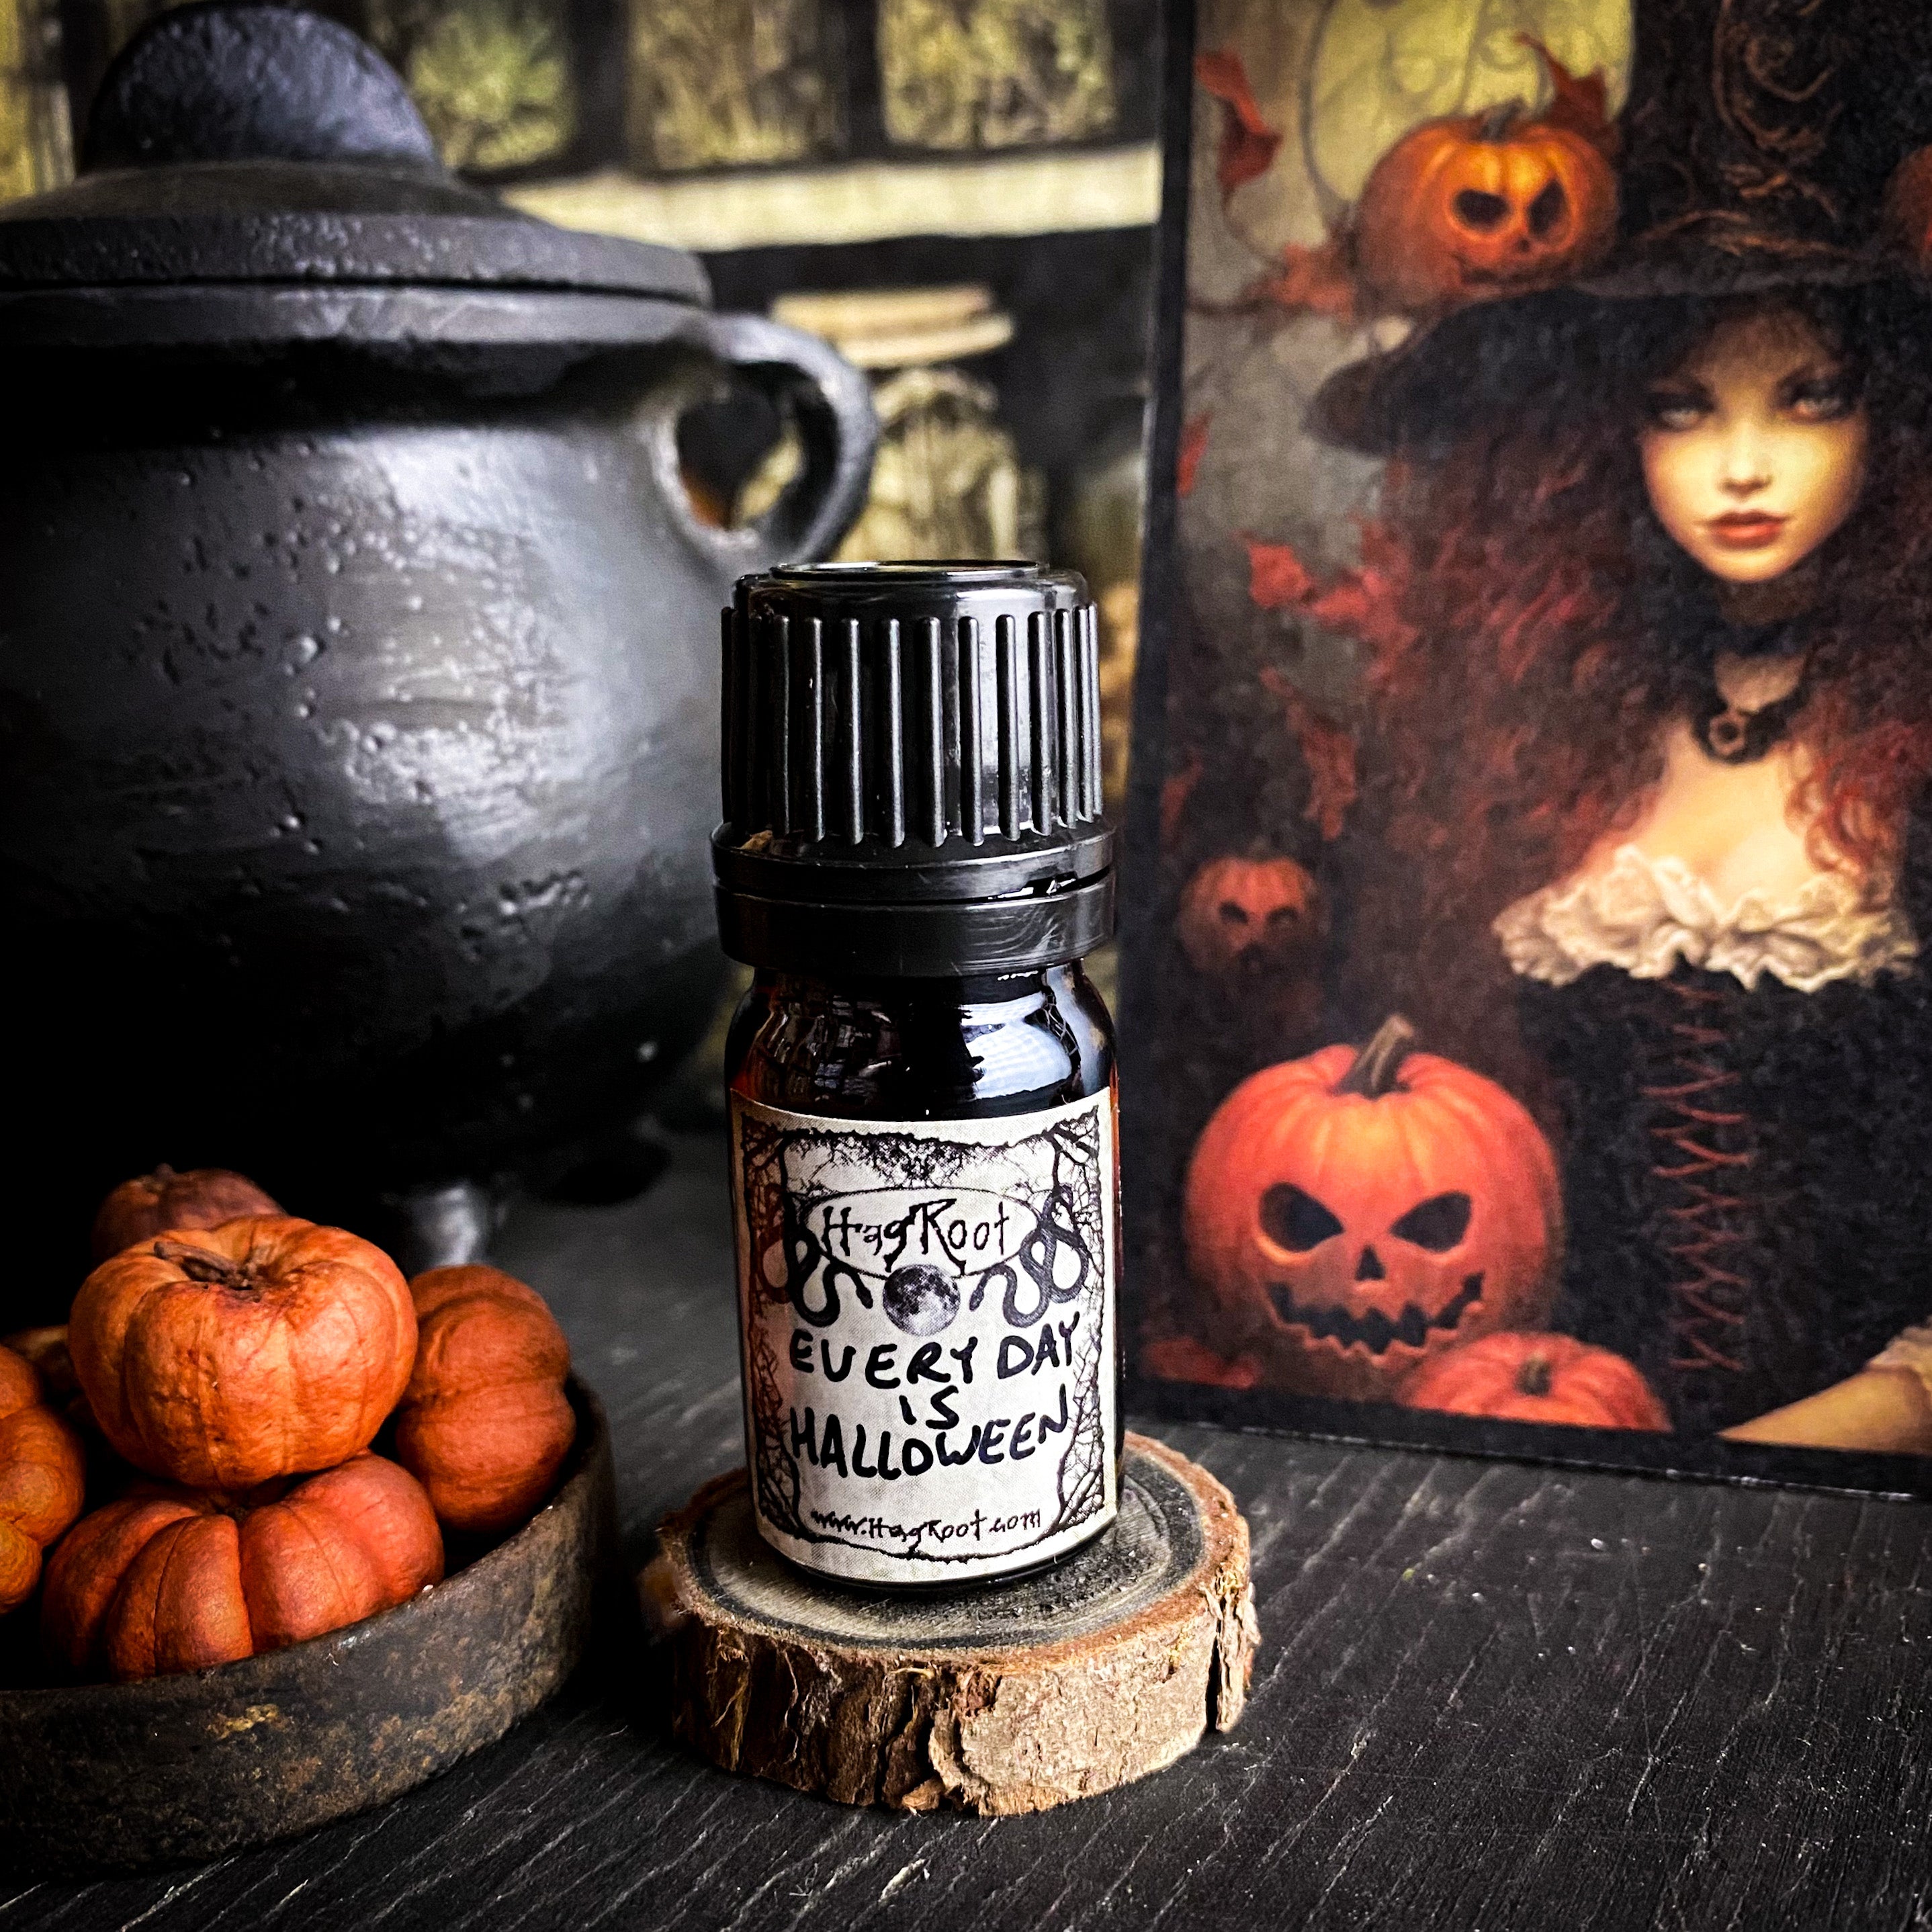 EVERY DAY IS HALLOWEEN-(Pumpkin, Patchouli, Candy, Spice, Dark Woods)-Perfume, Cologne, Anointing, Ritual Oil